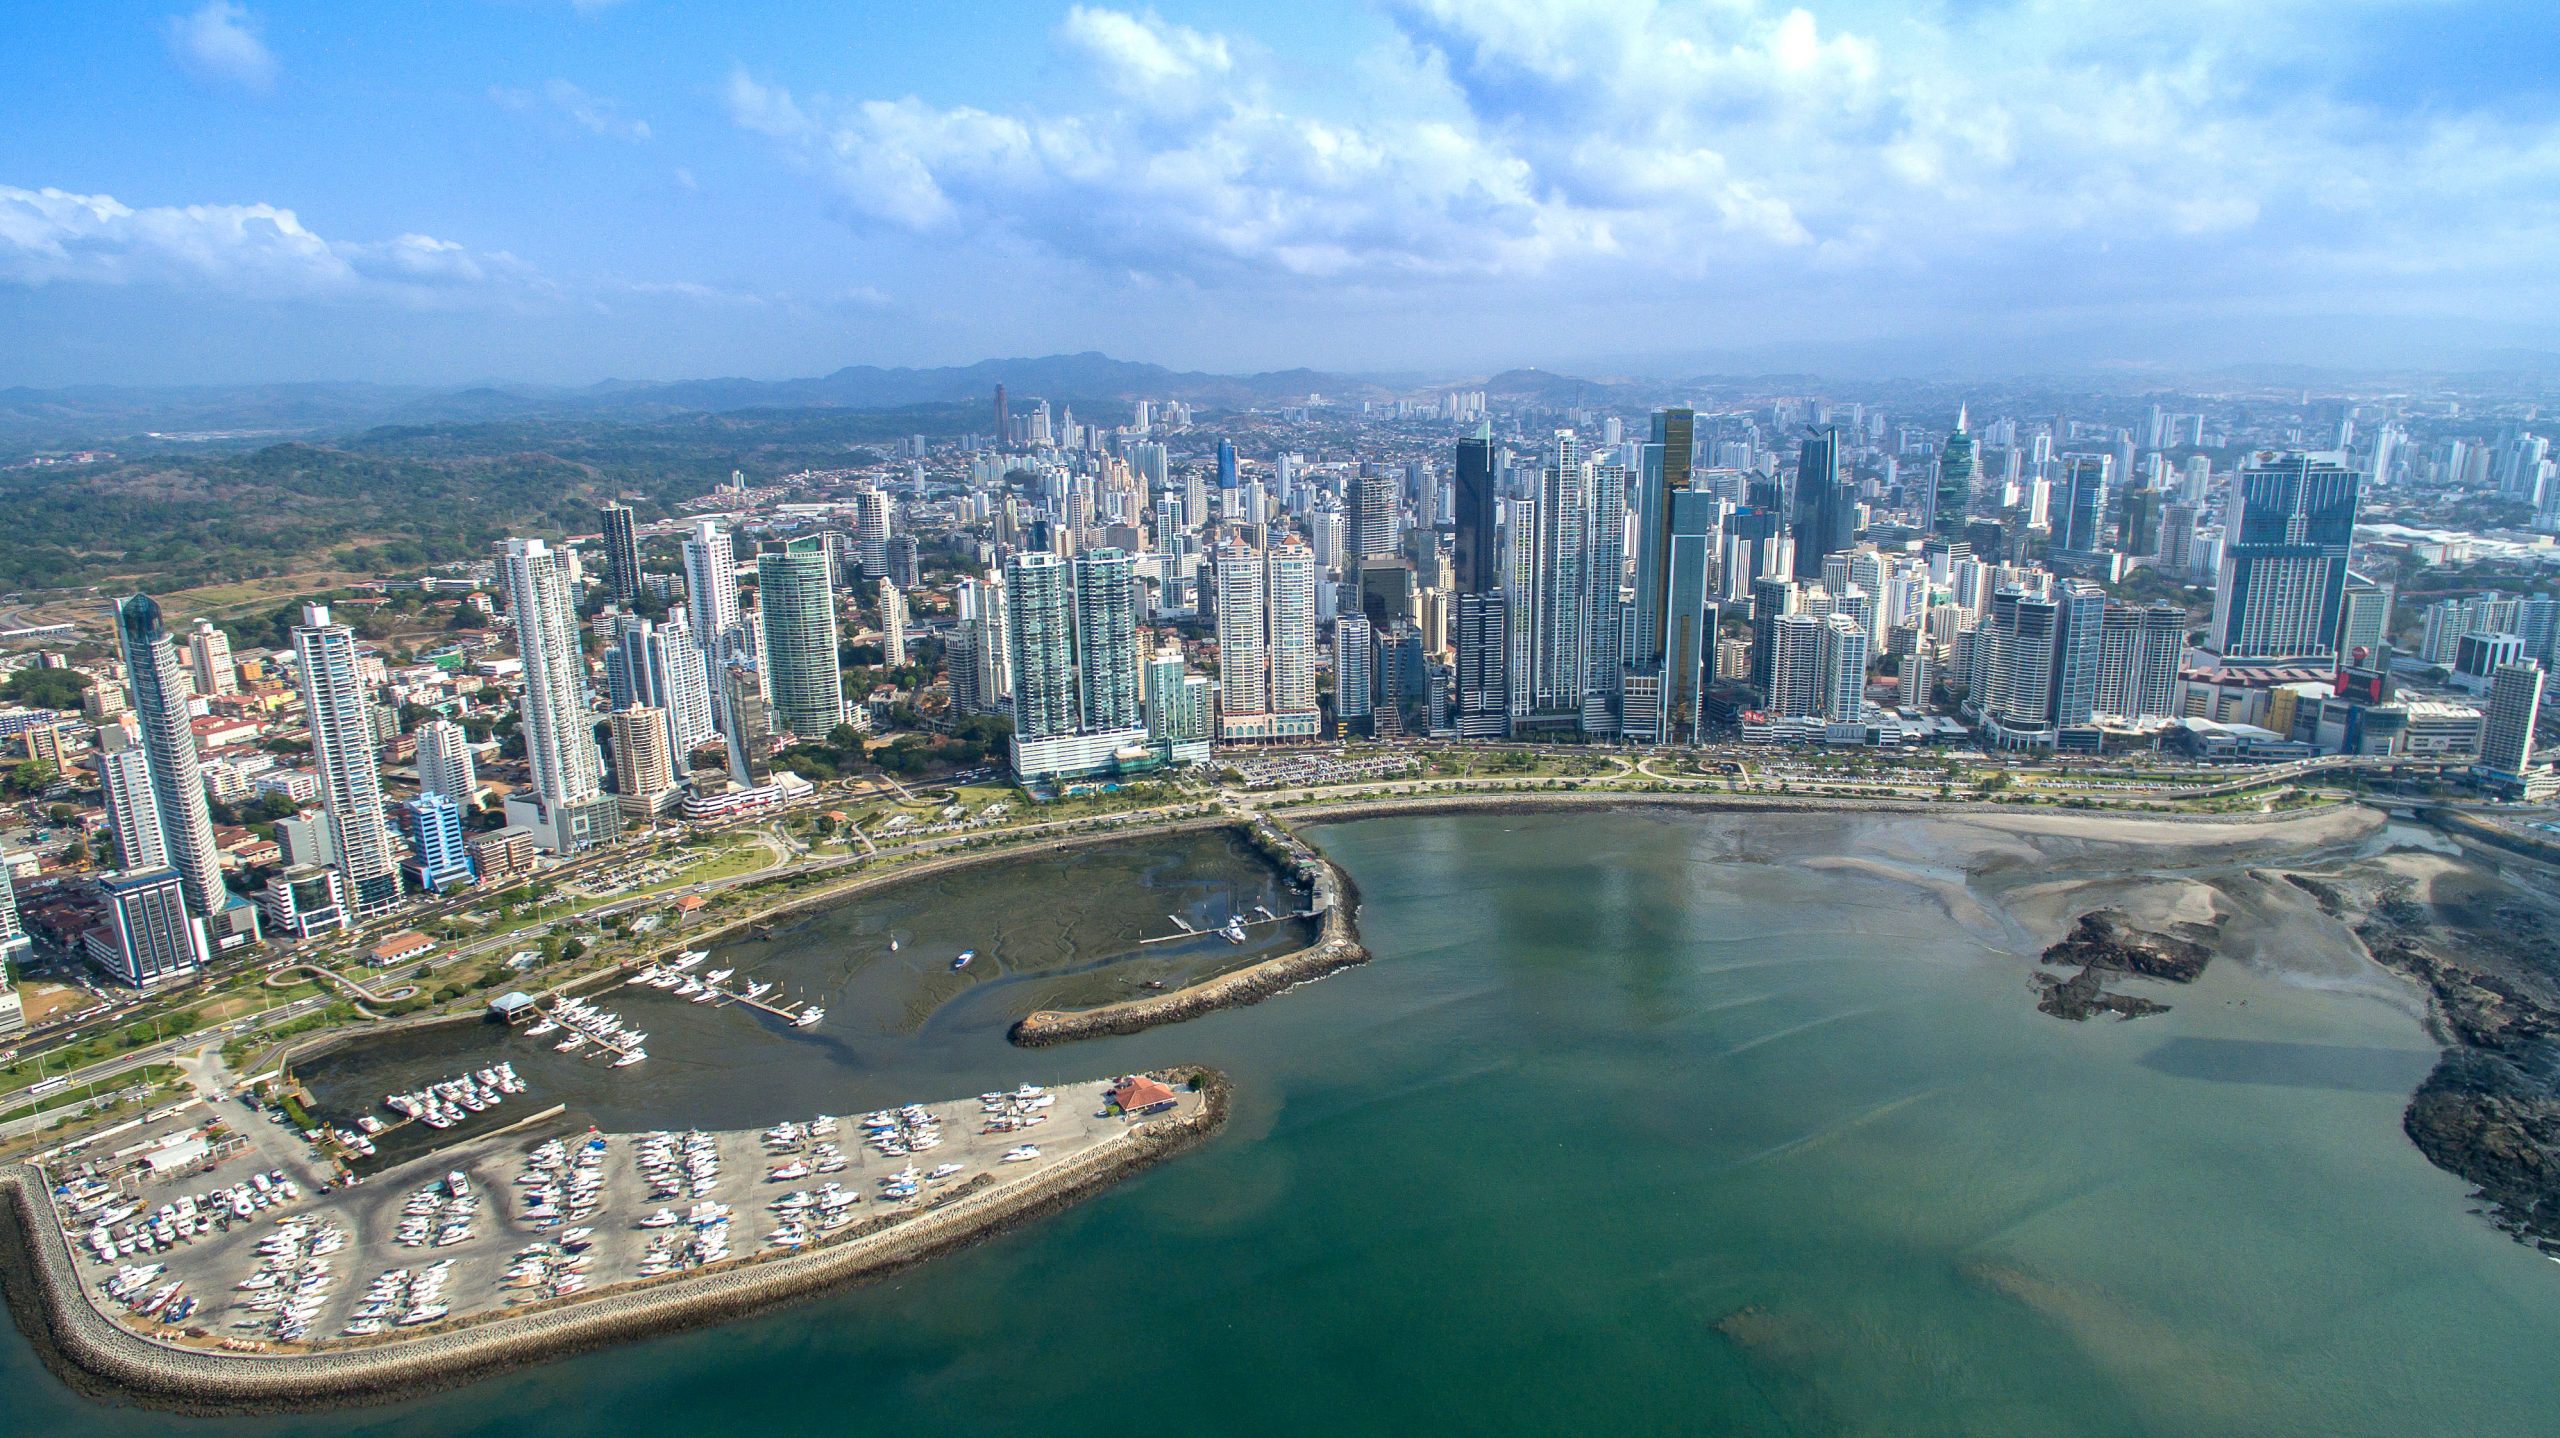 Panama Bahia Ariel View of Panama City And The Bay With Impressive High Rise Buildings In The Foreground And Mountains In The Distance